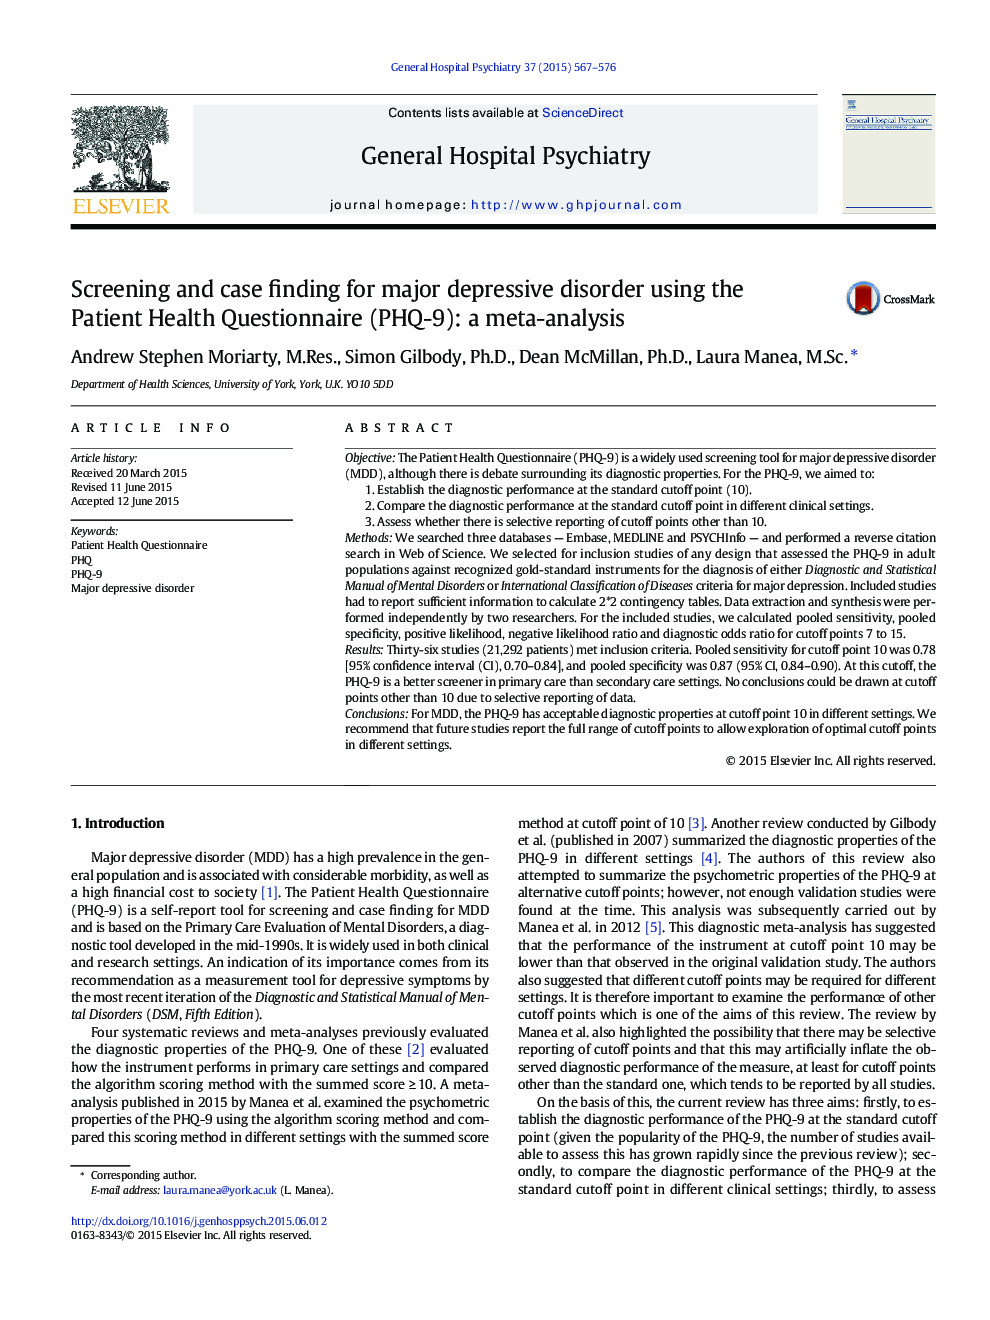 Primary Care-PsychiatryScreening and case finding for major depressive disorder using the Patient Health Questionnaire (PHQ-9): a meta-analysis